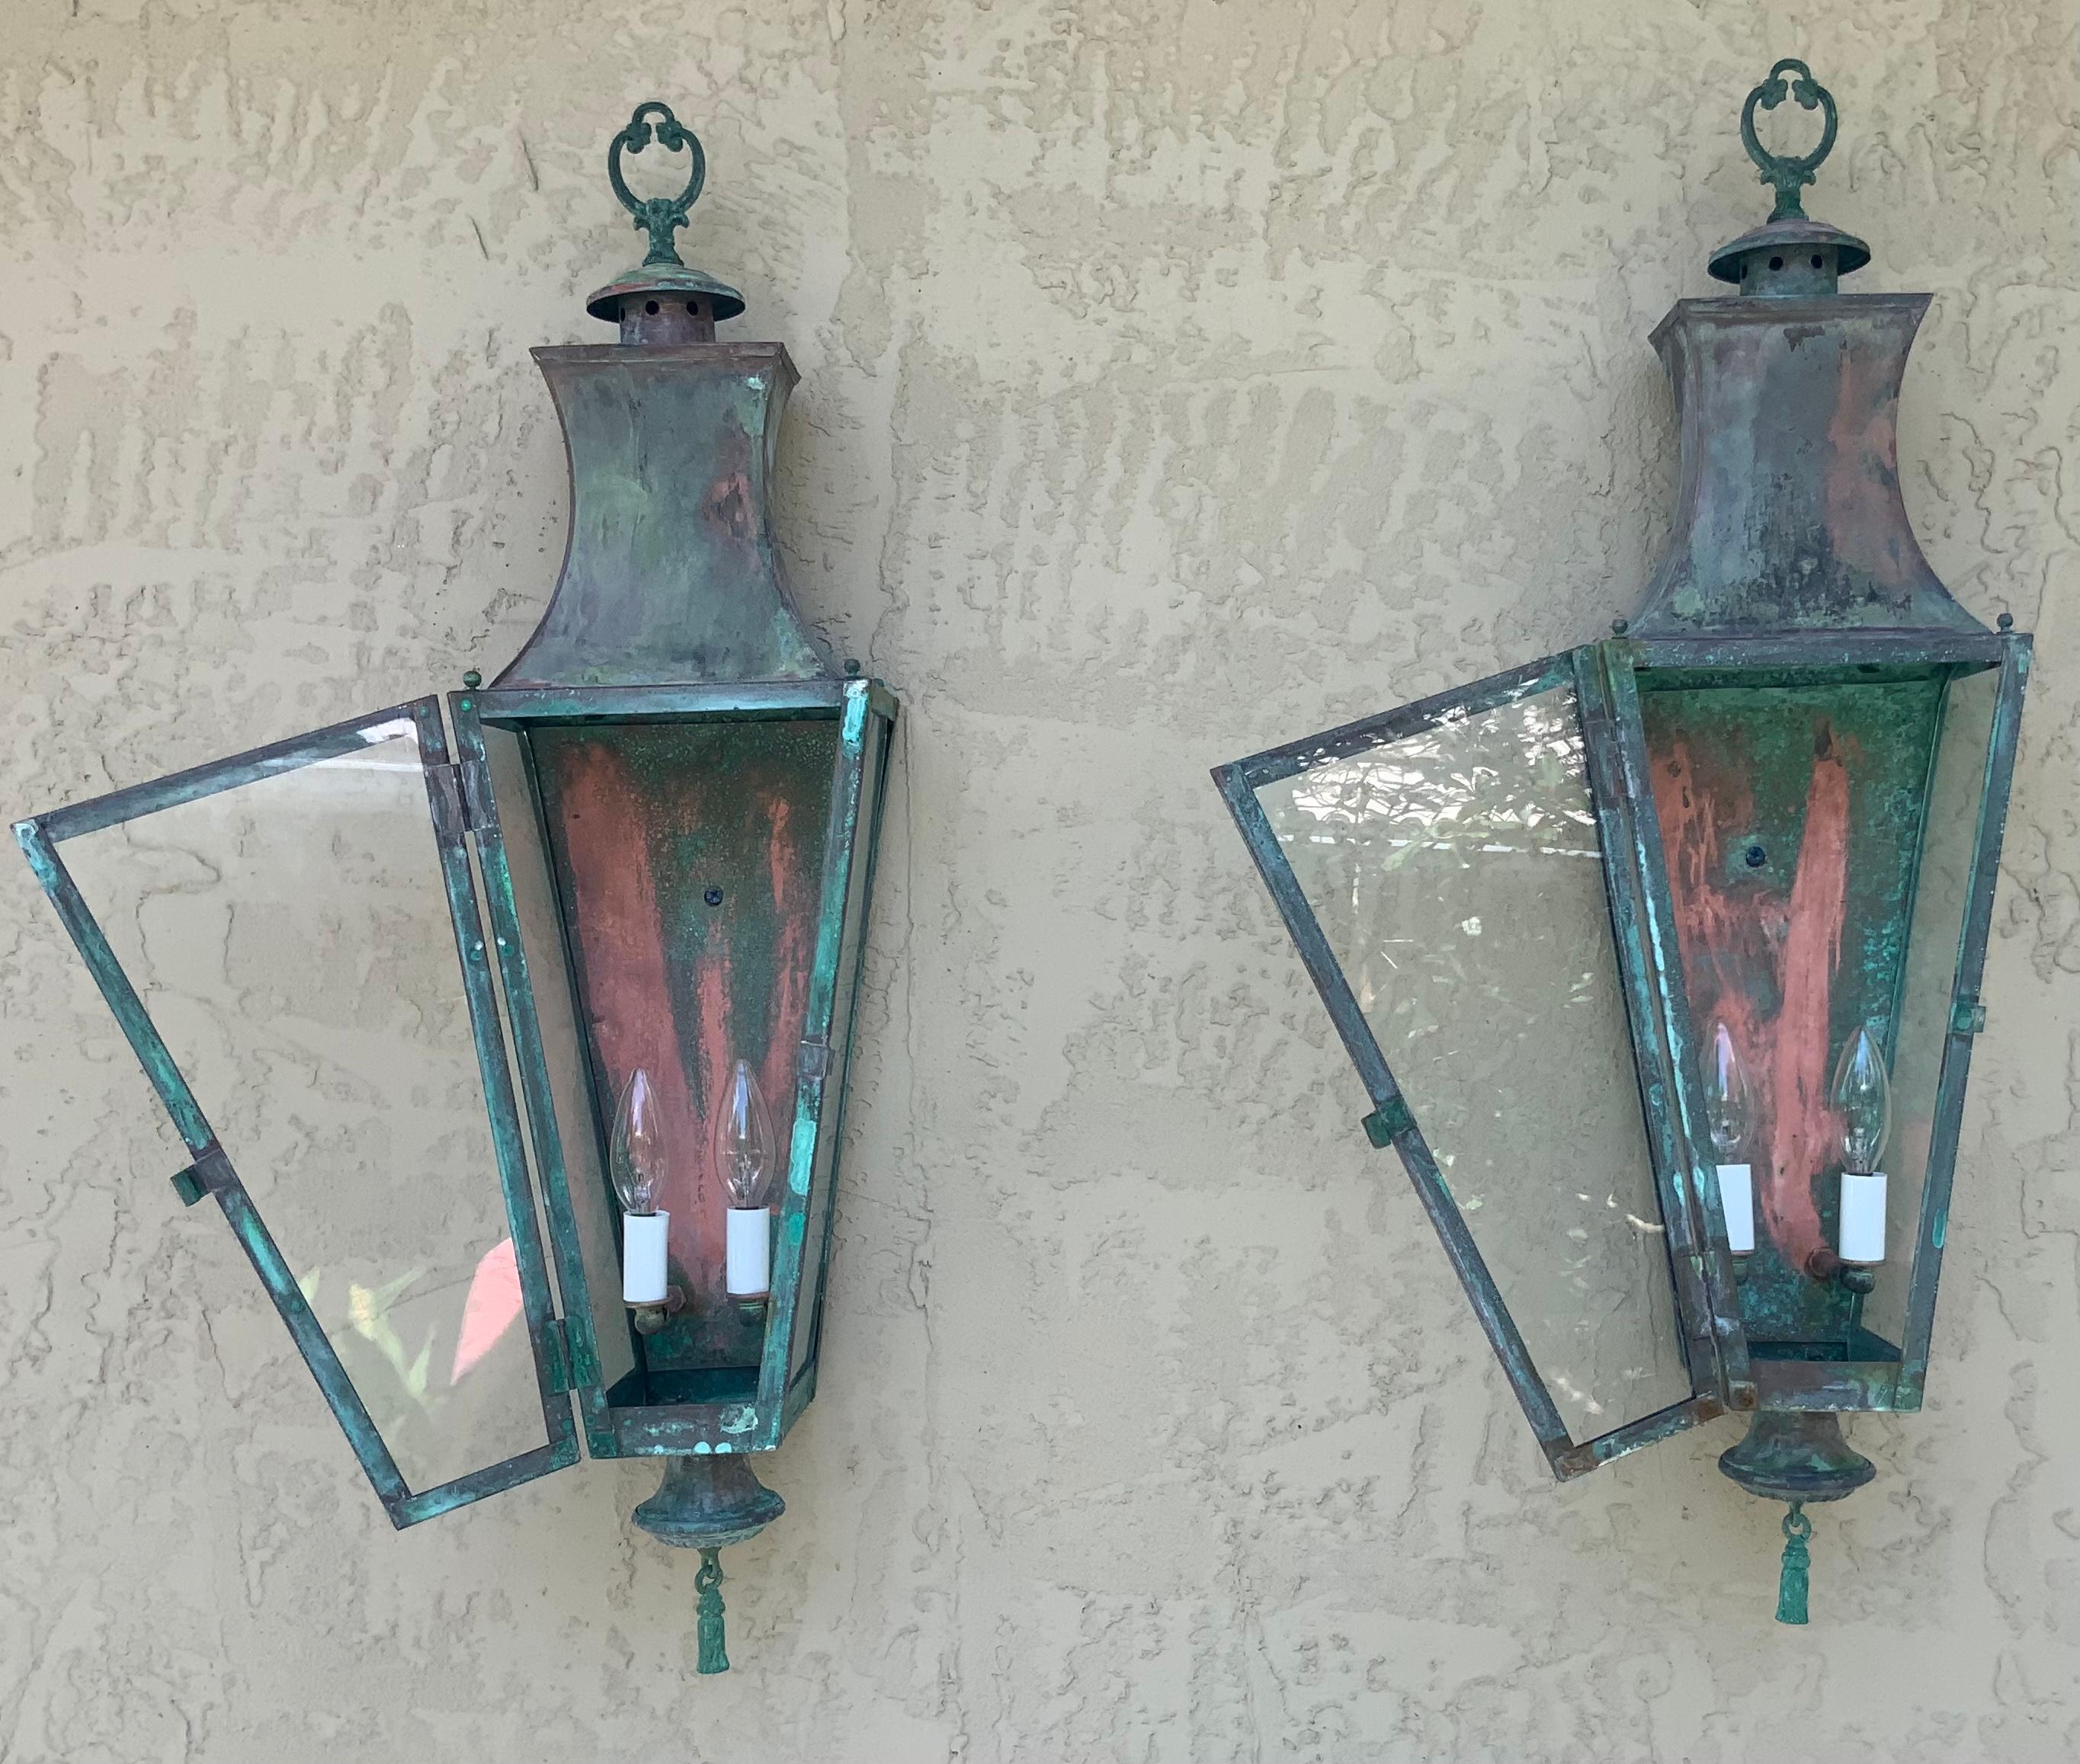 Pair of vintage wall lantern or wall sconces, made of solid brass beautifully weathered patina, two 60/watt lights each lantern,
Very decorative pair.